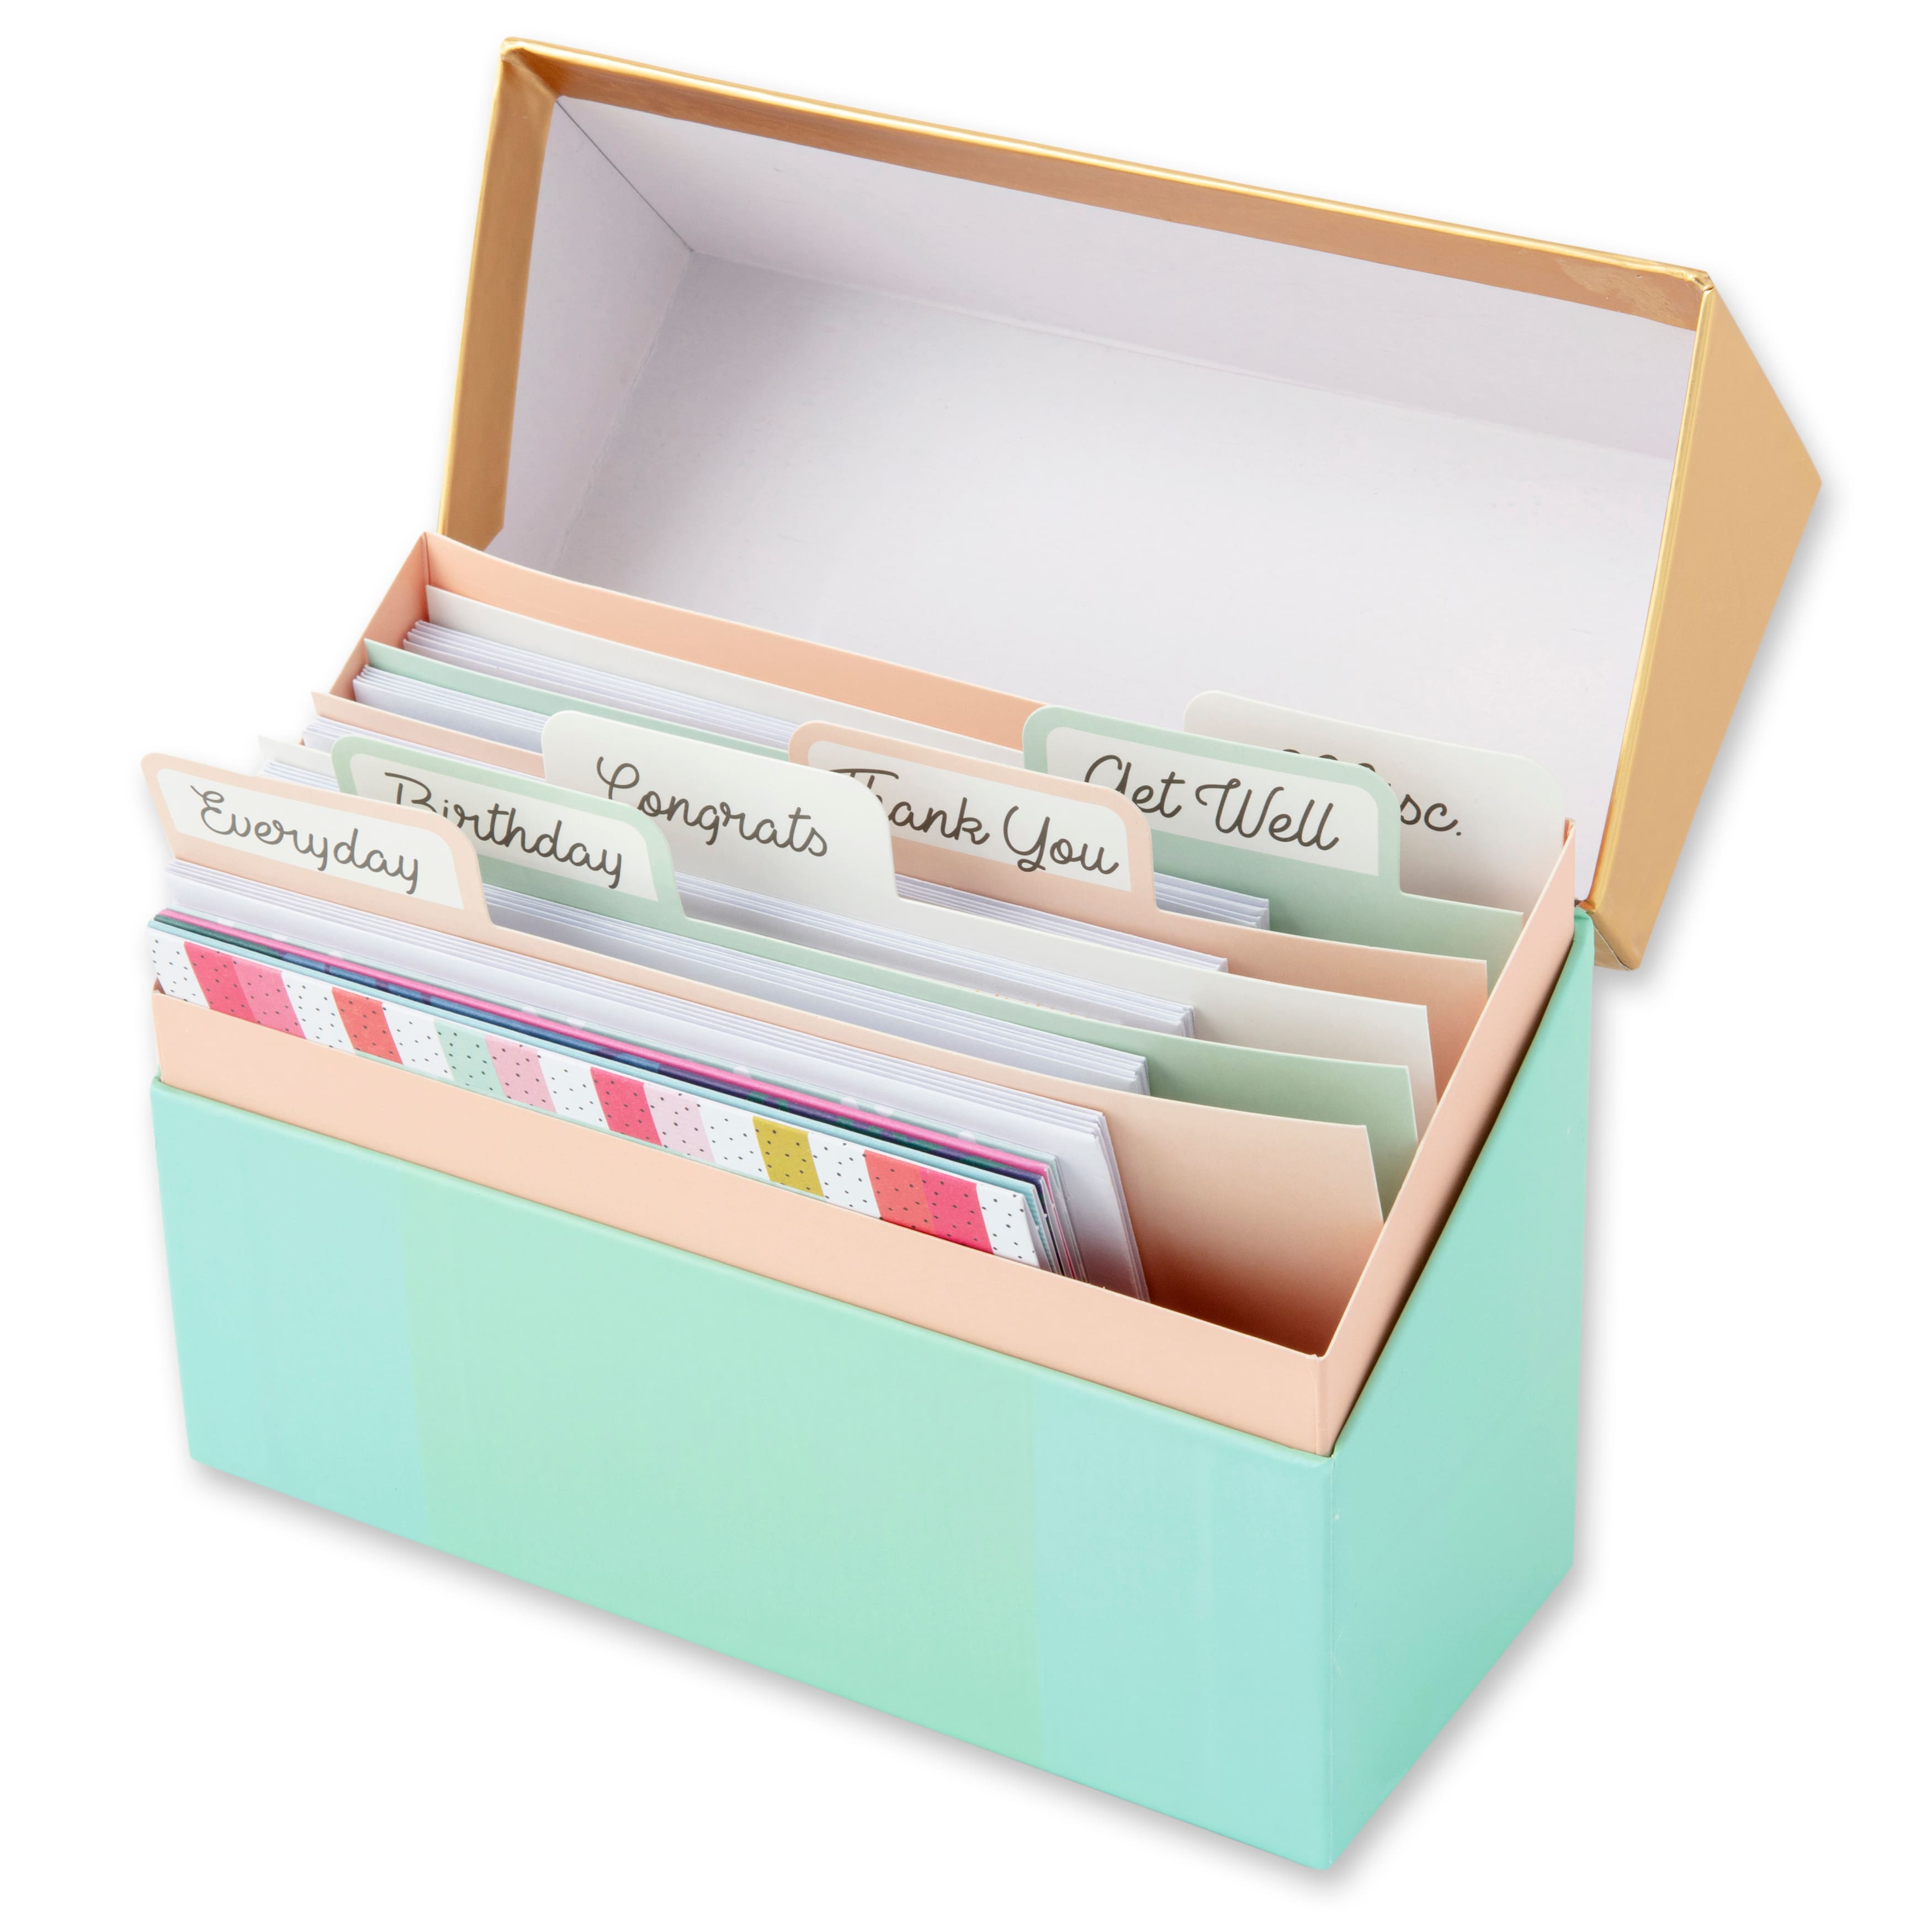 Shop for the Boxed Greeting Cards by Recollections™, 4 x 5.6 at